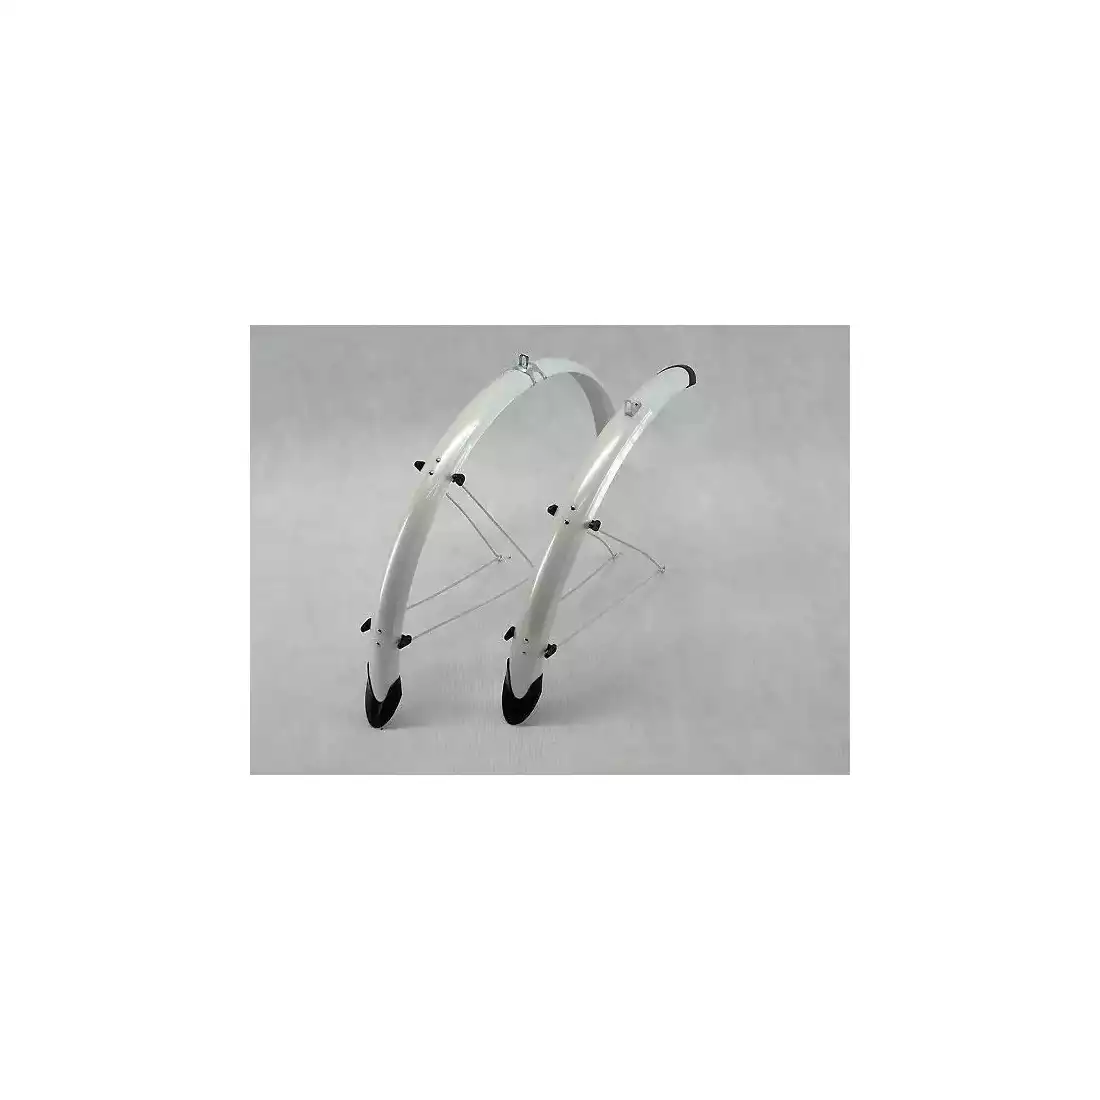 ORION 26''/53 set of bicycle fenders, white